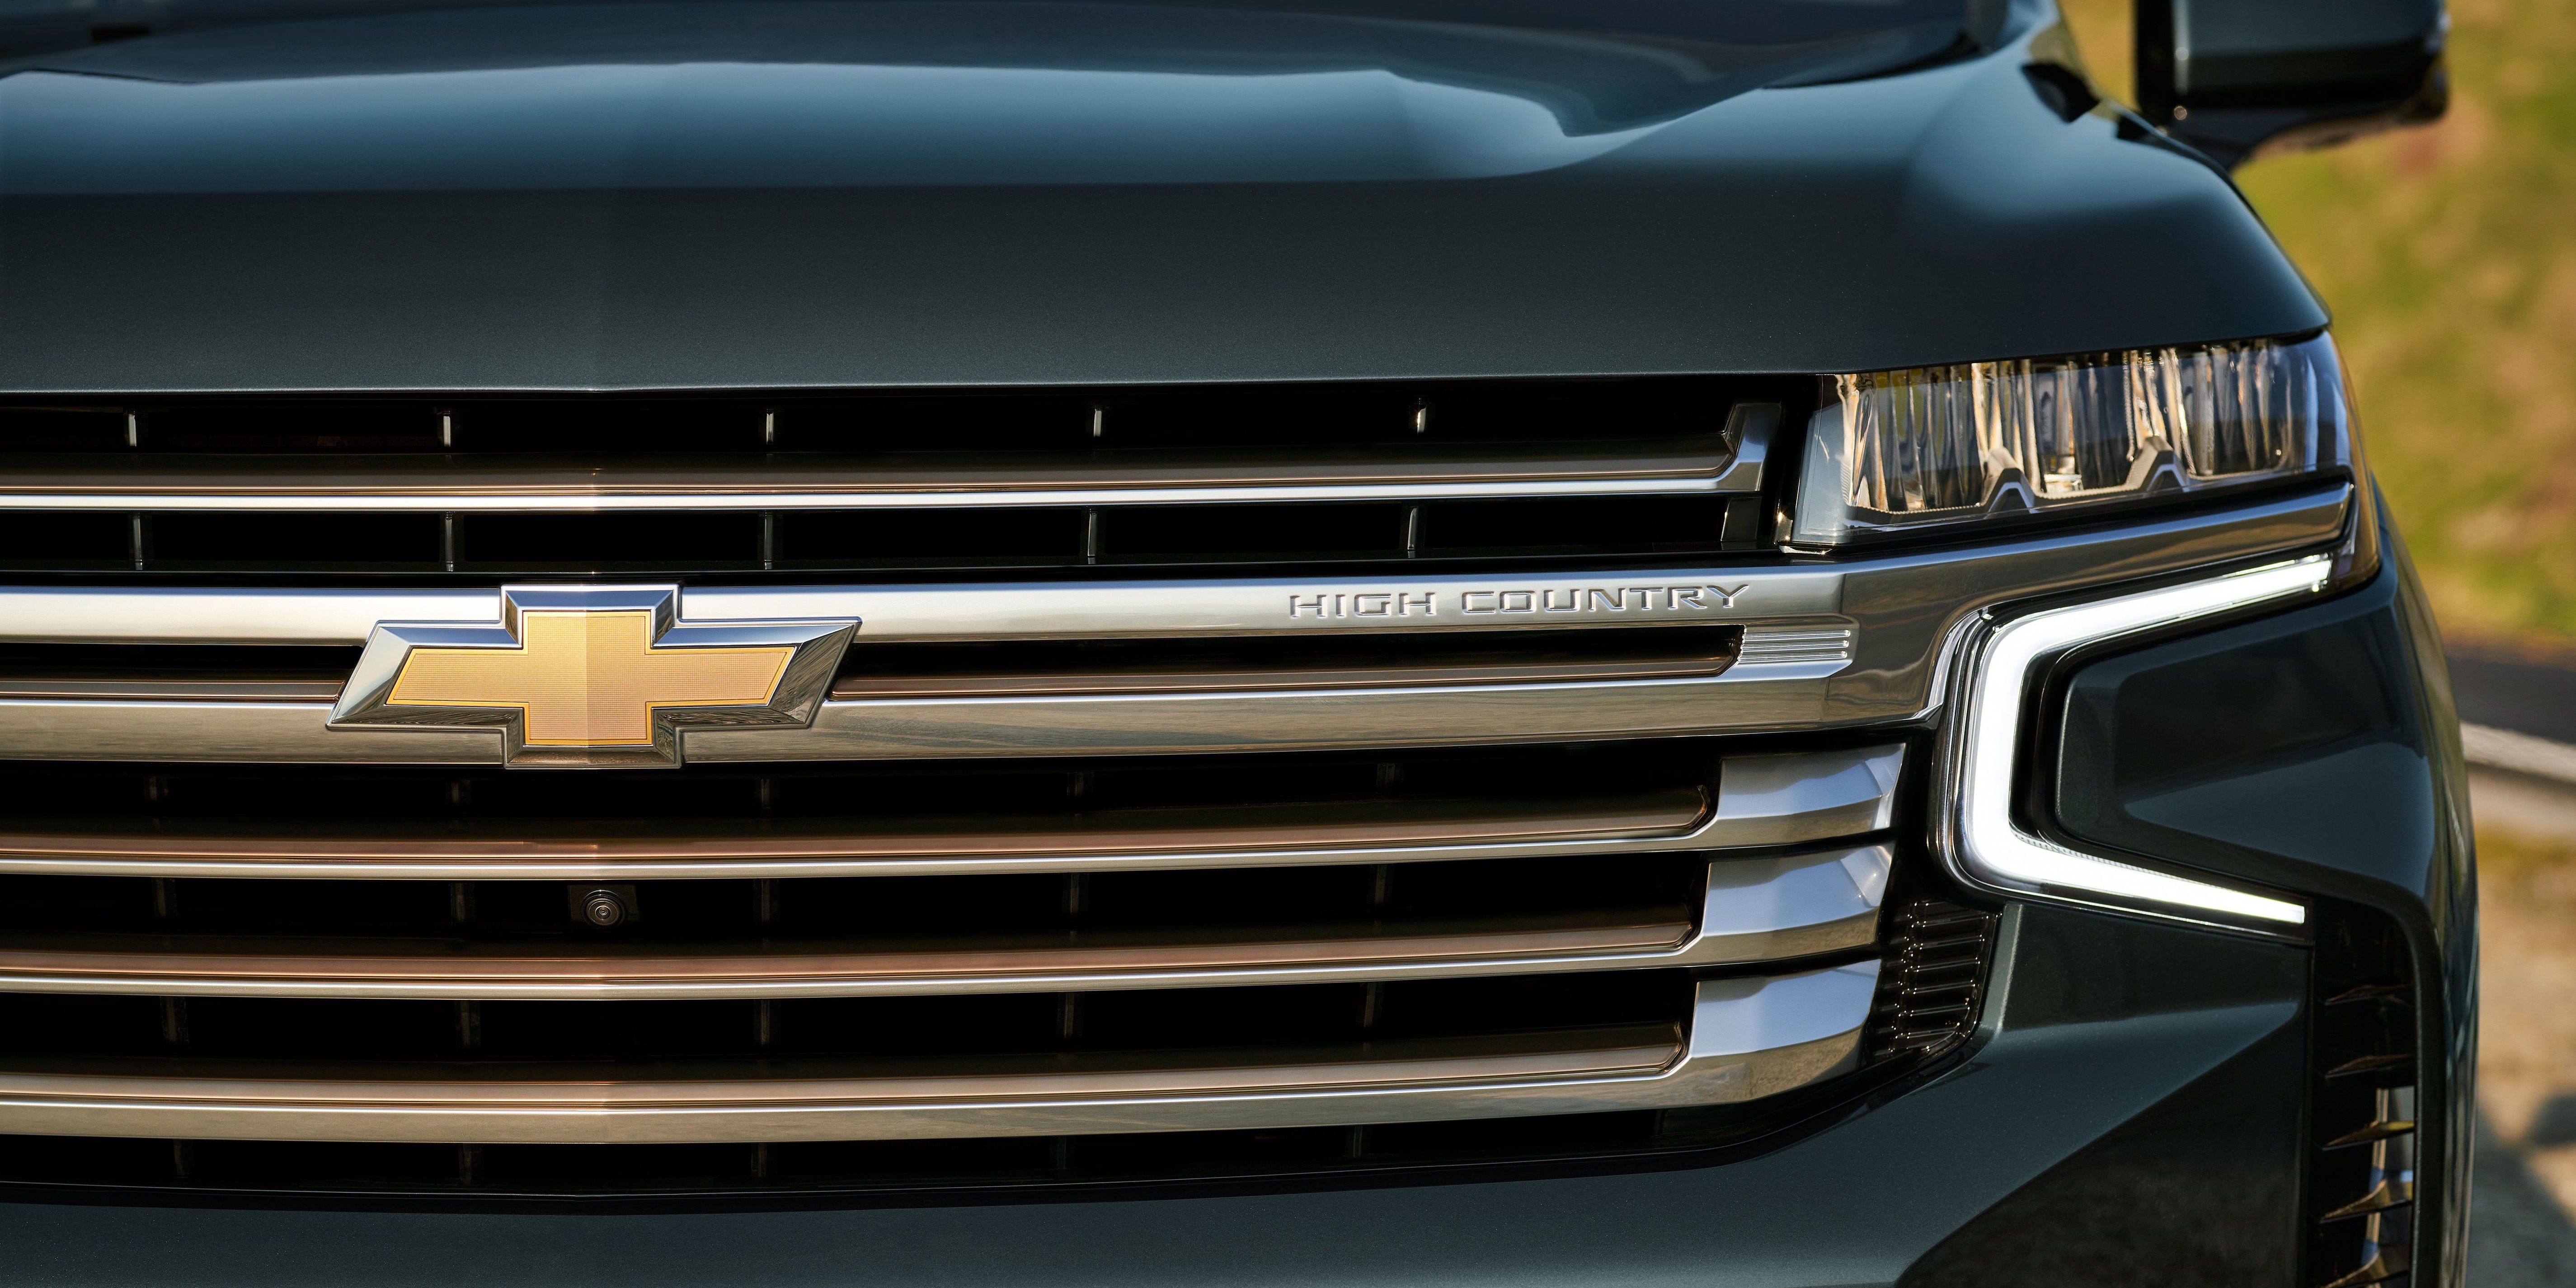 Chevrolet Tahoe front close-up